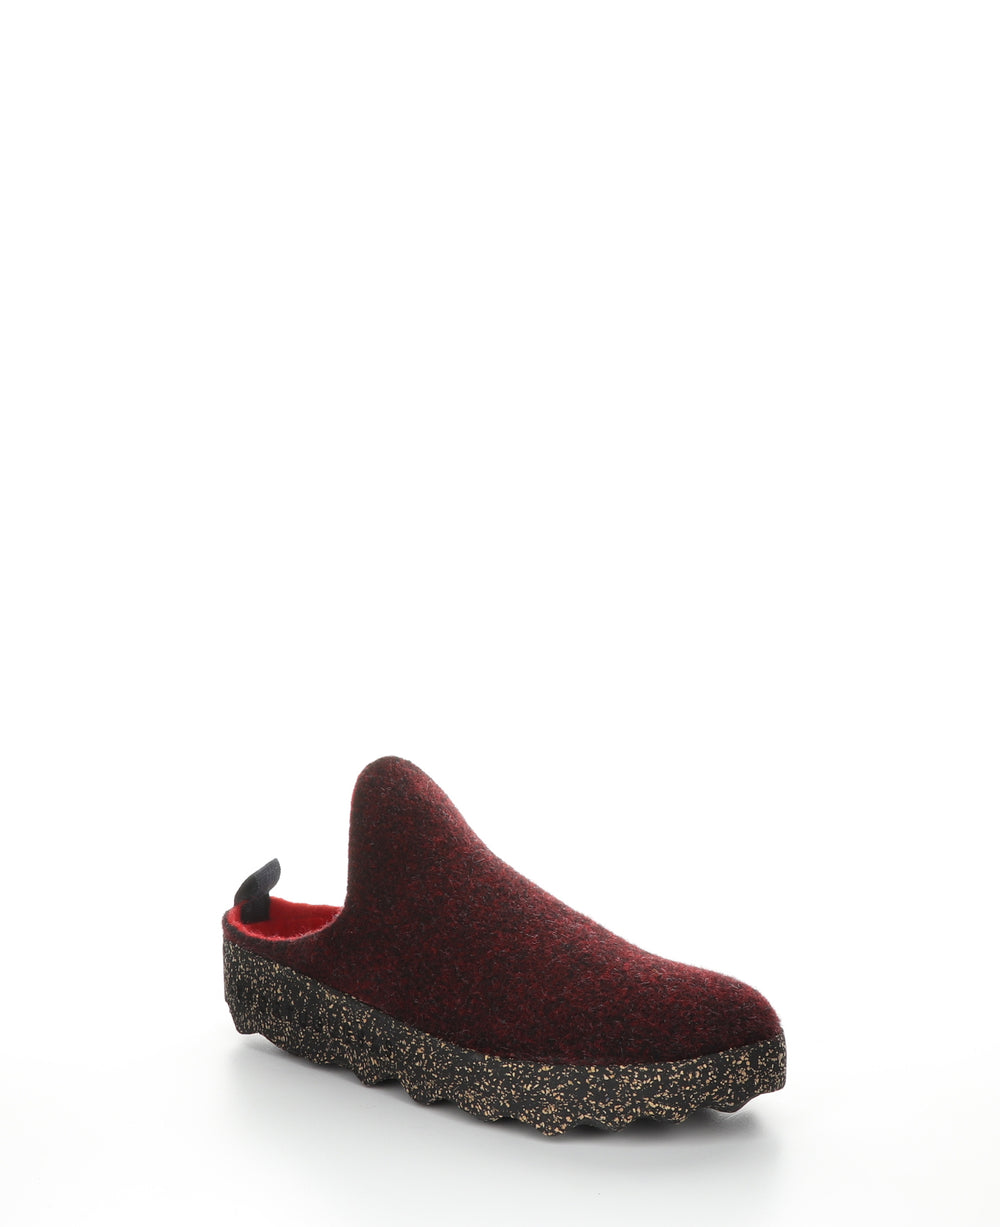 COME023ASP Merlot Round Toe Shoes|COME023ASP Chaussures à Bout Rond in Rouge